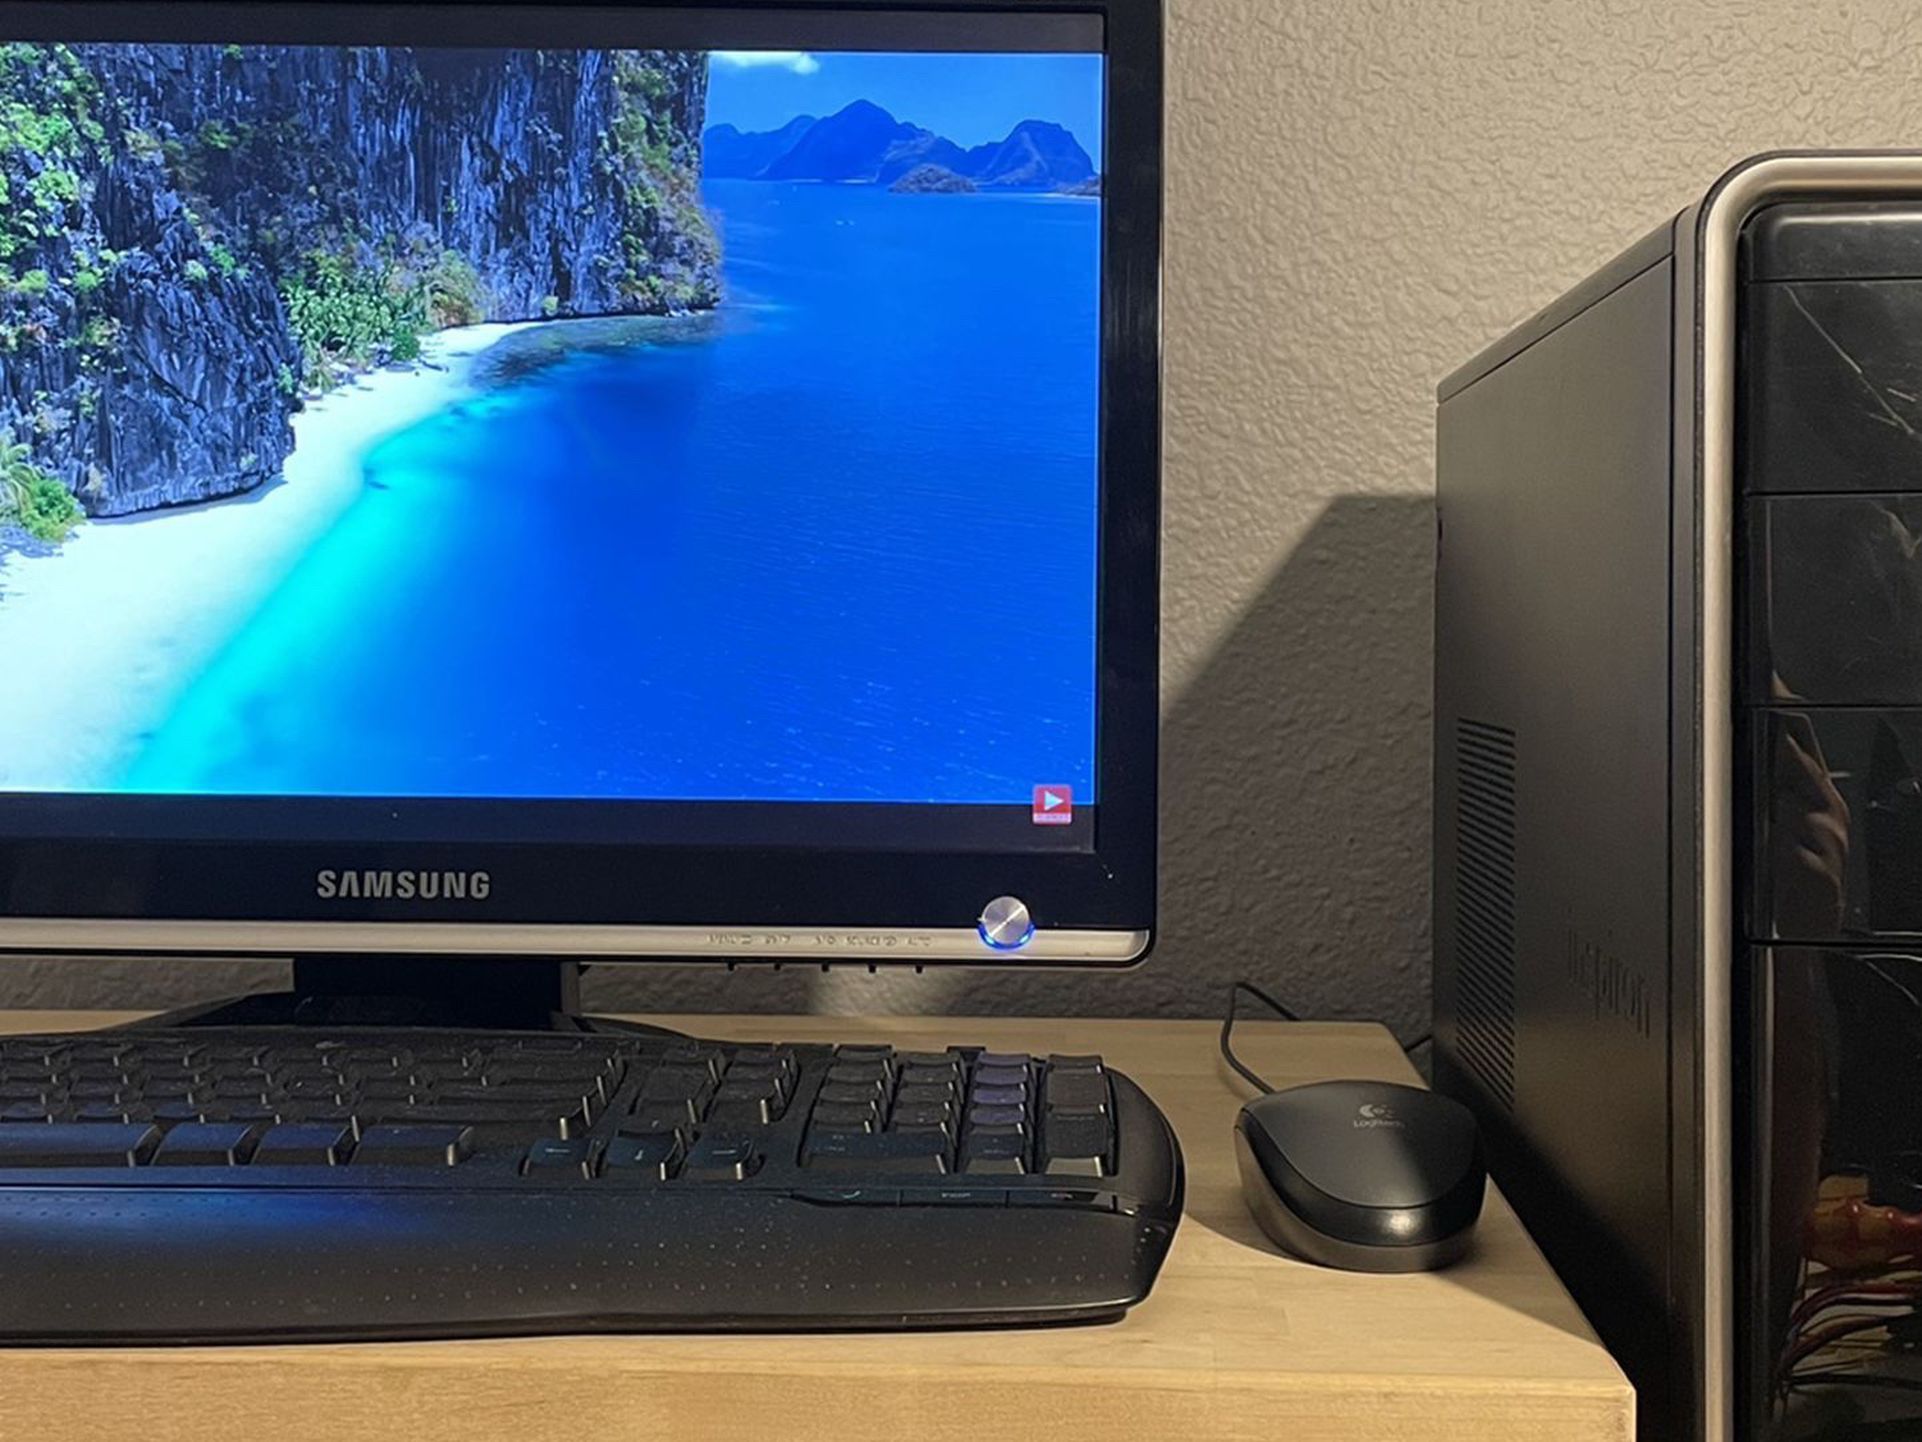 Dell Computer Inspiron 3847 With 19” Samsung Monitor